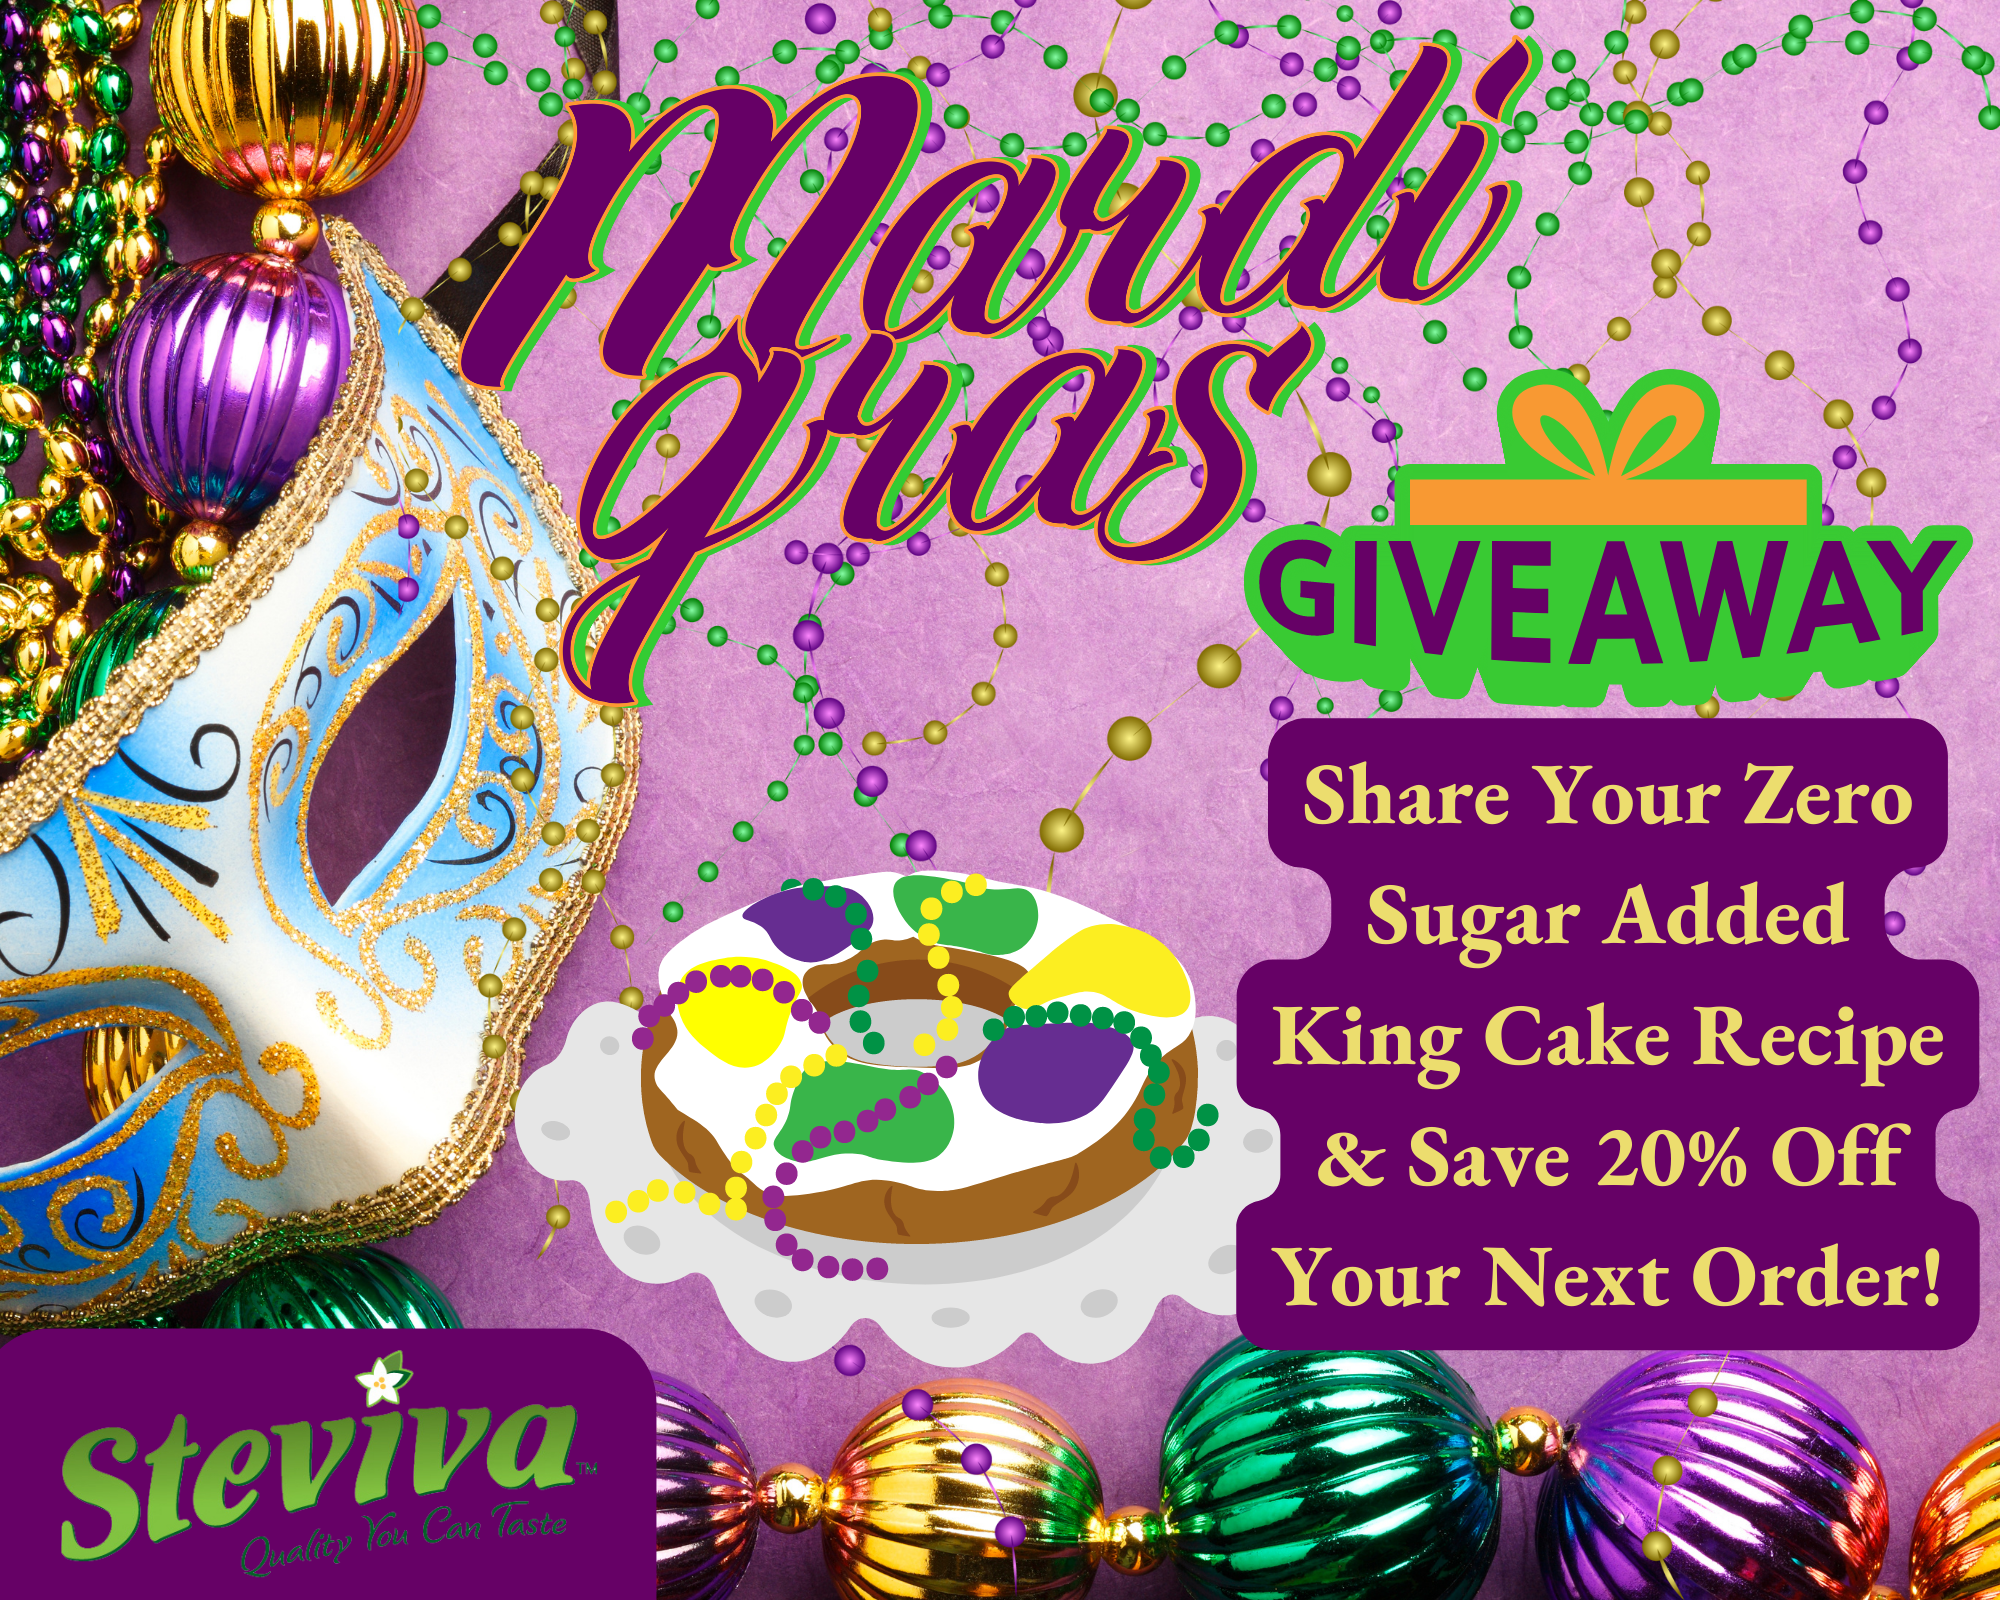 Mardi Gras Giveaway! Share Your Zero Sugar Added King Cake Recipe and Save 20% Off Your Next Order!